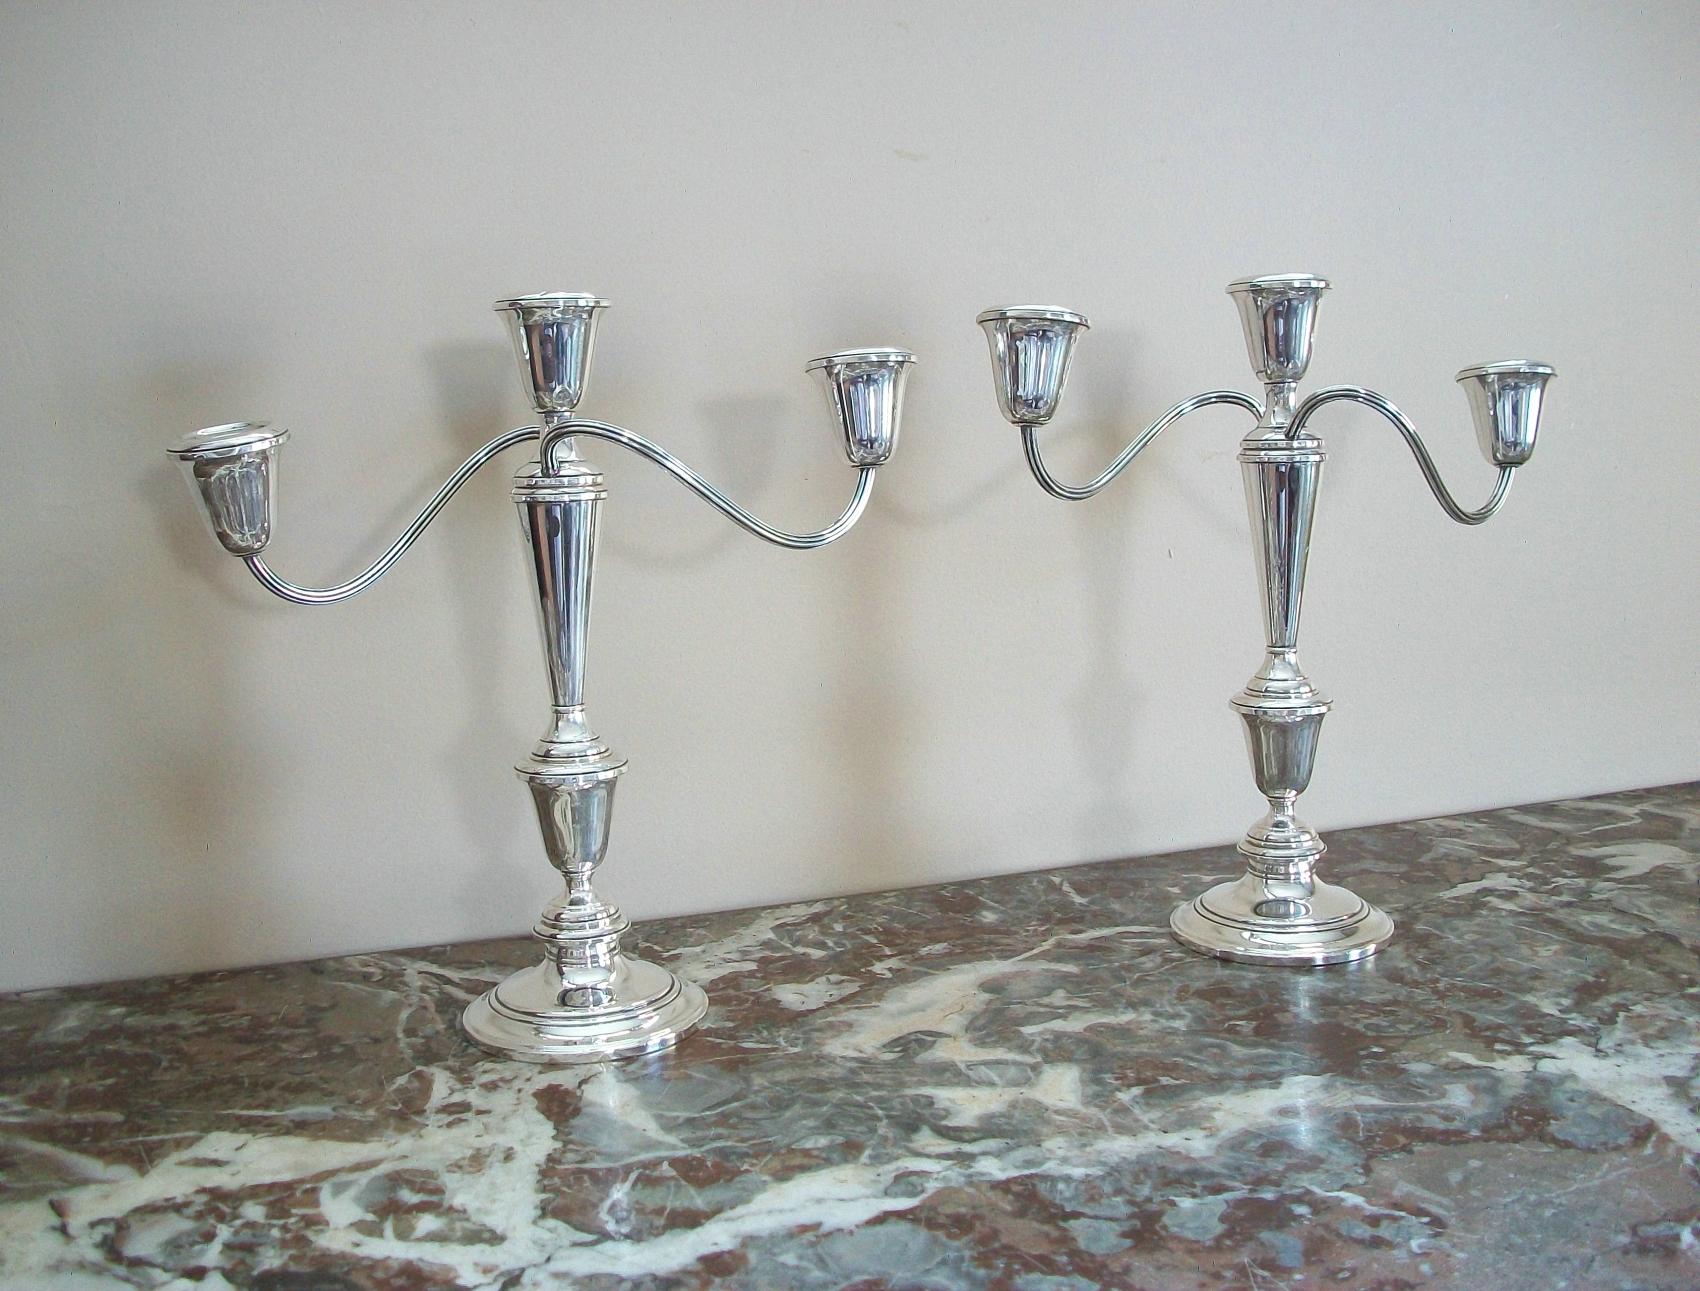 NEWPORT - Vintage pair of sterling silver candelabra - pattern number 16218 - weighted - classic traditional design - signed on the base - United States - mid 20th century.

Good vintage condition - one nozzle loose/wobbly but stable - few dents to